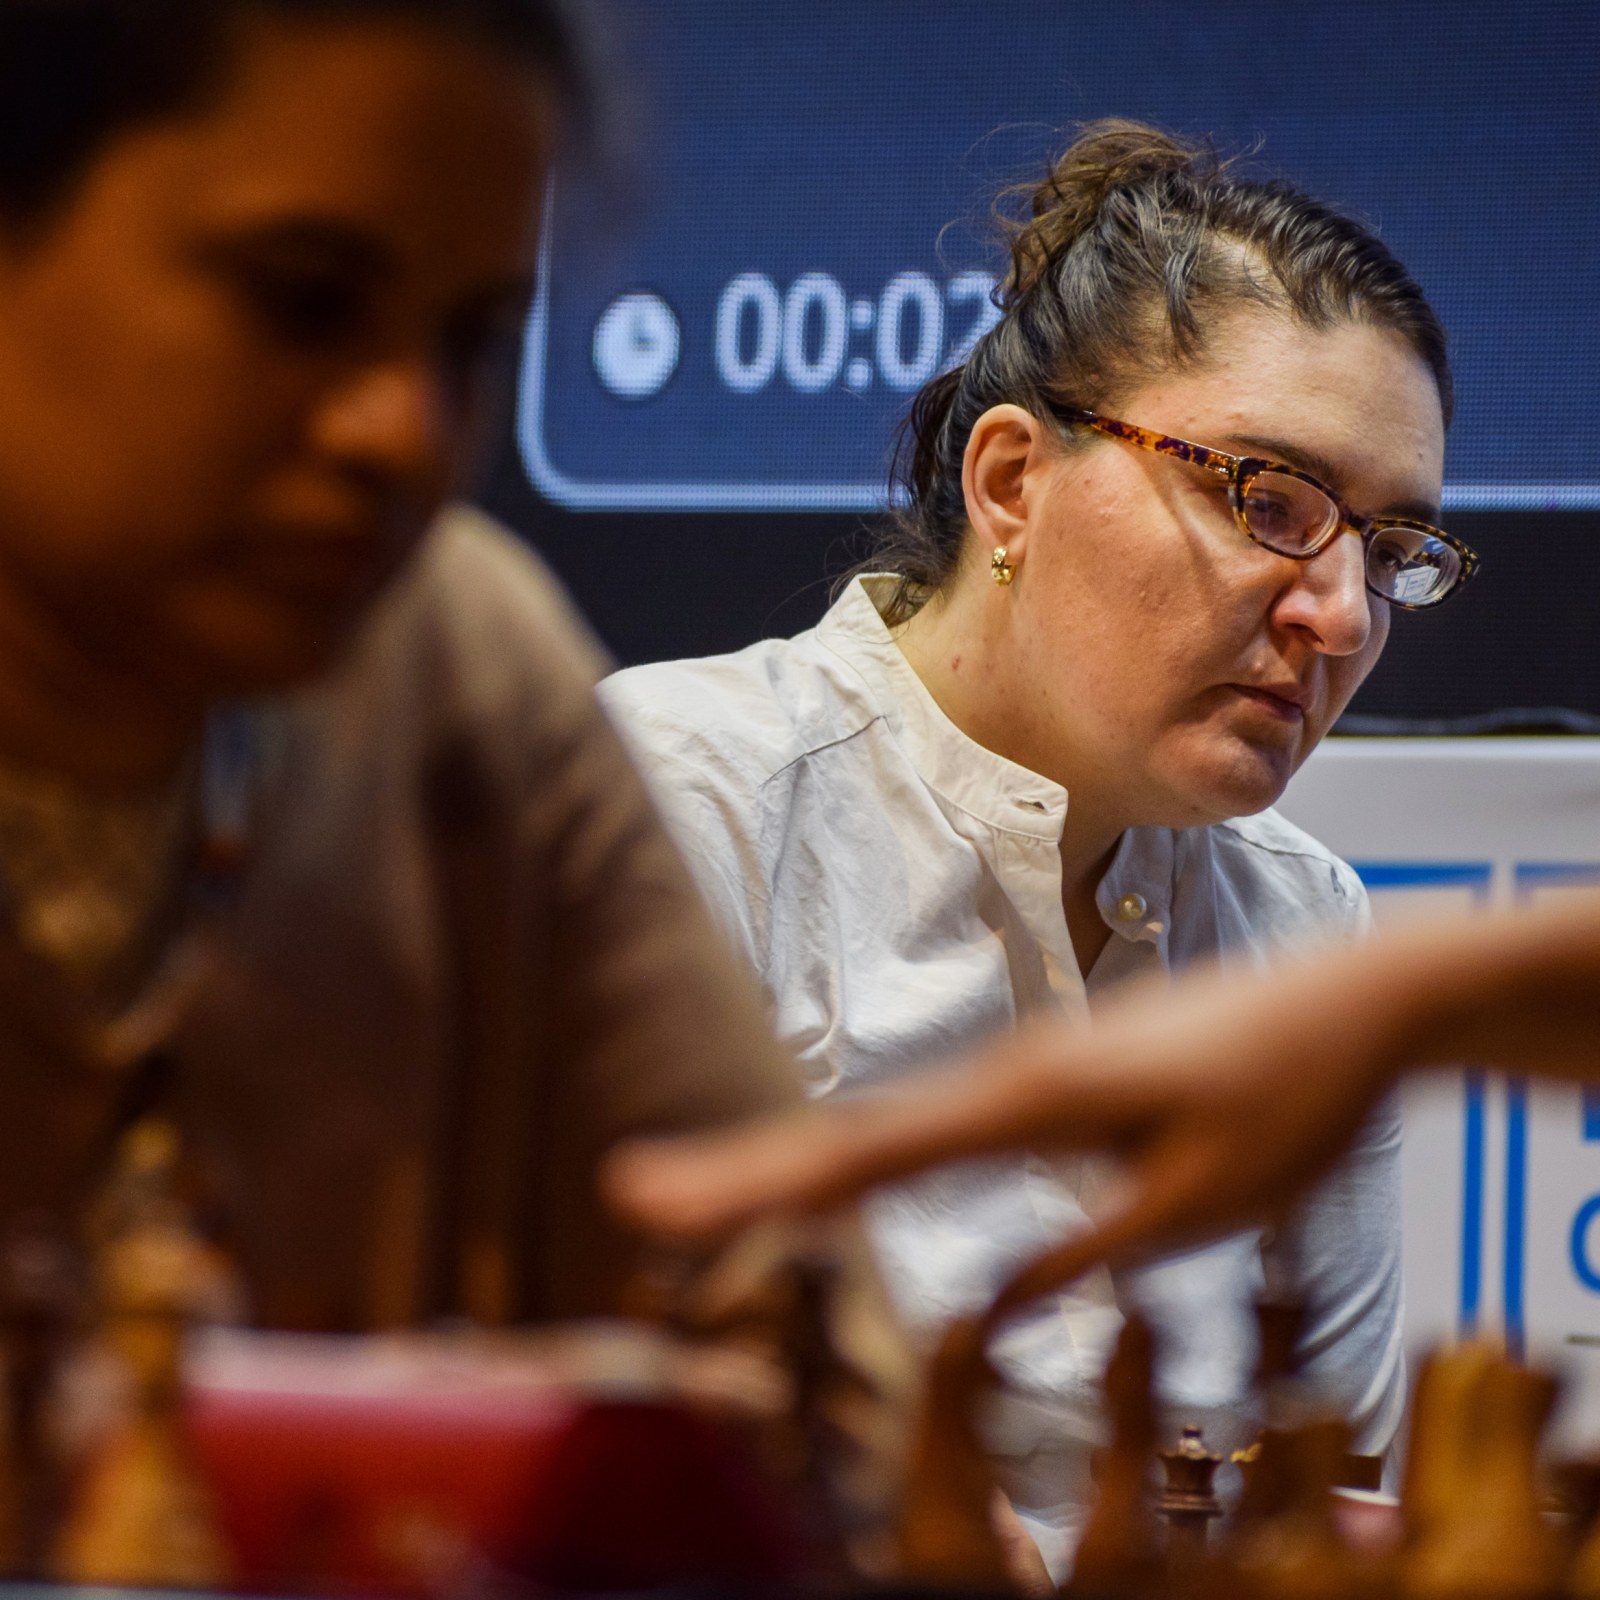 Women's chess”: A misleading and counterproductive label